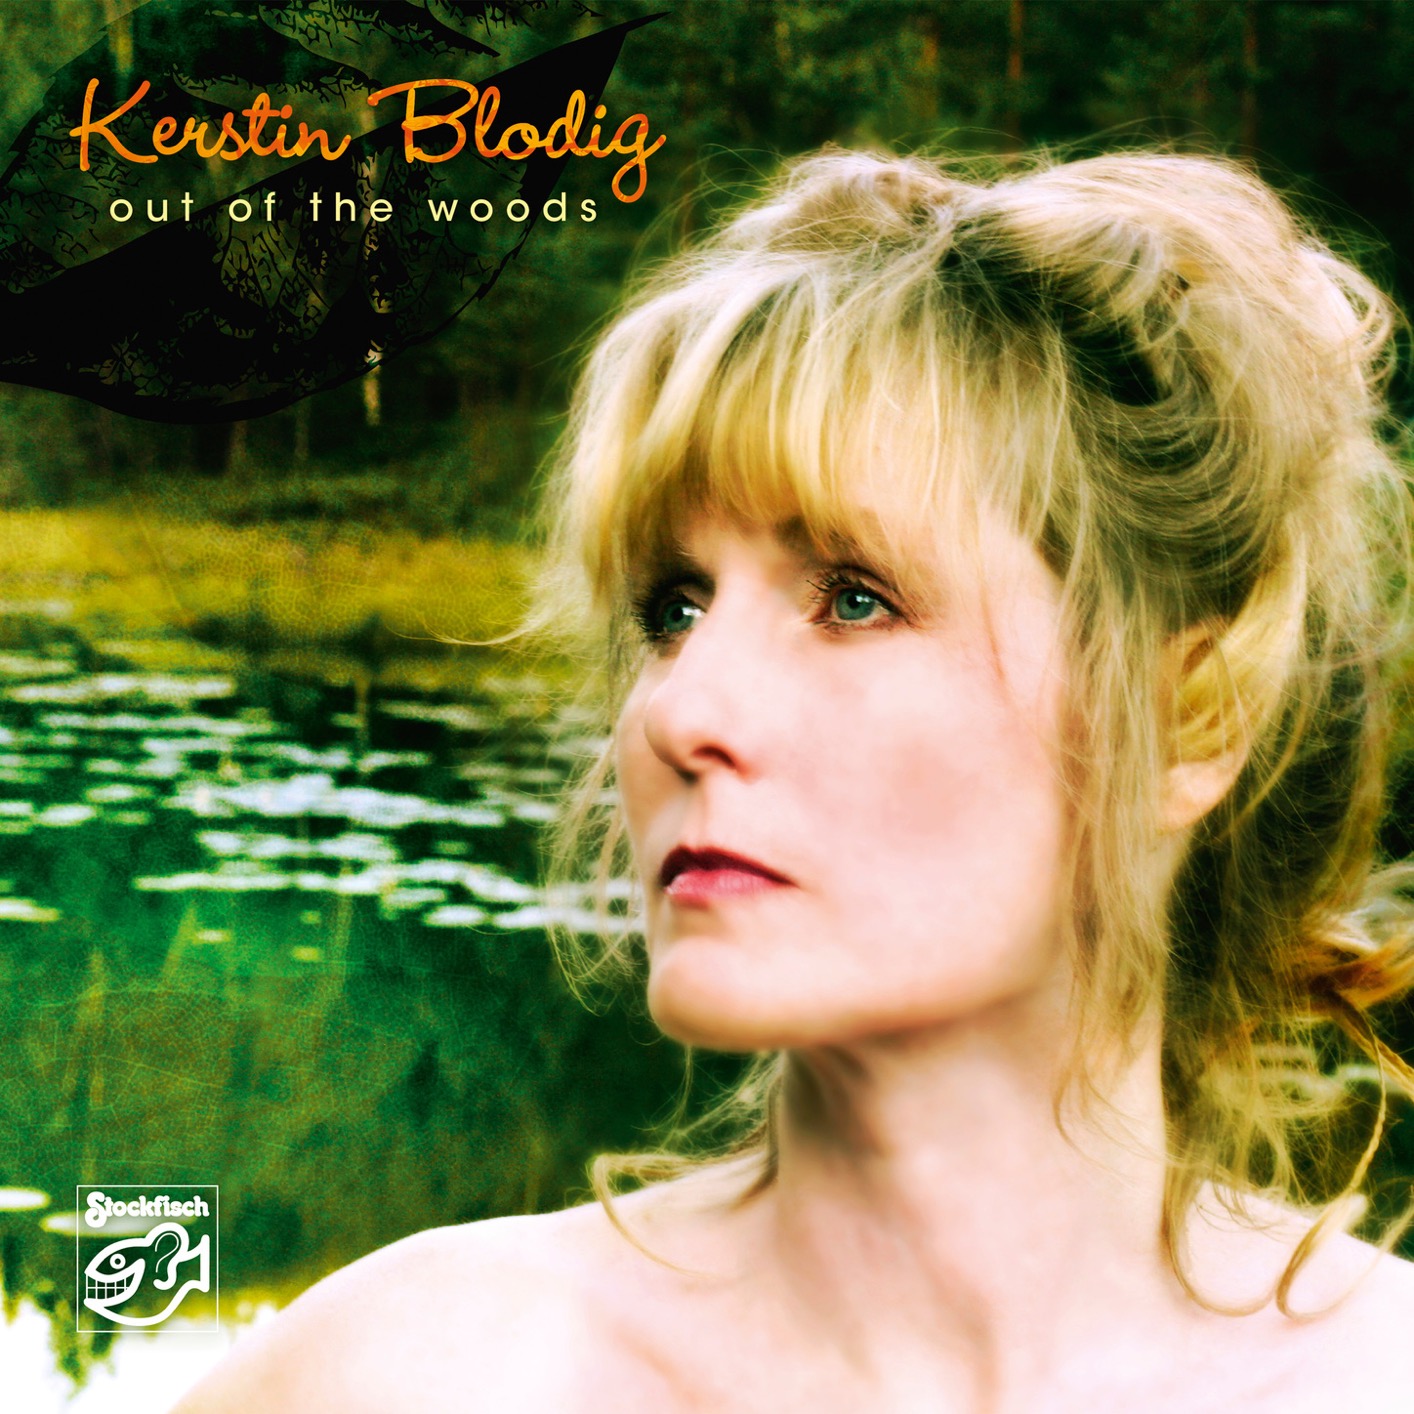 Kerstin Blodig – Out of the Woods (2015/2019) [FLAC 24bit/44,1kHz]